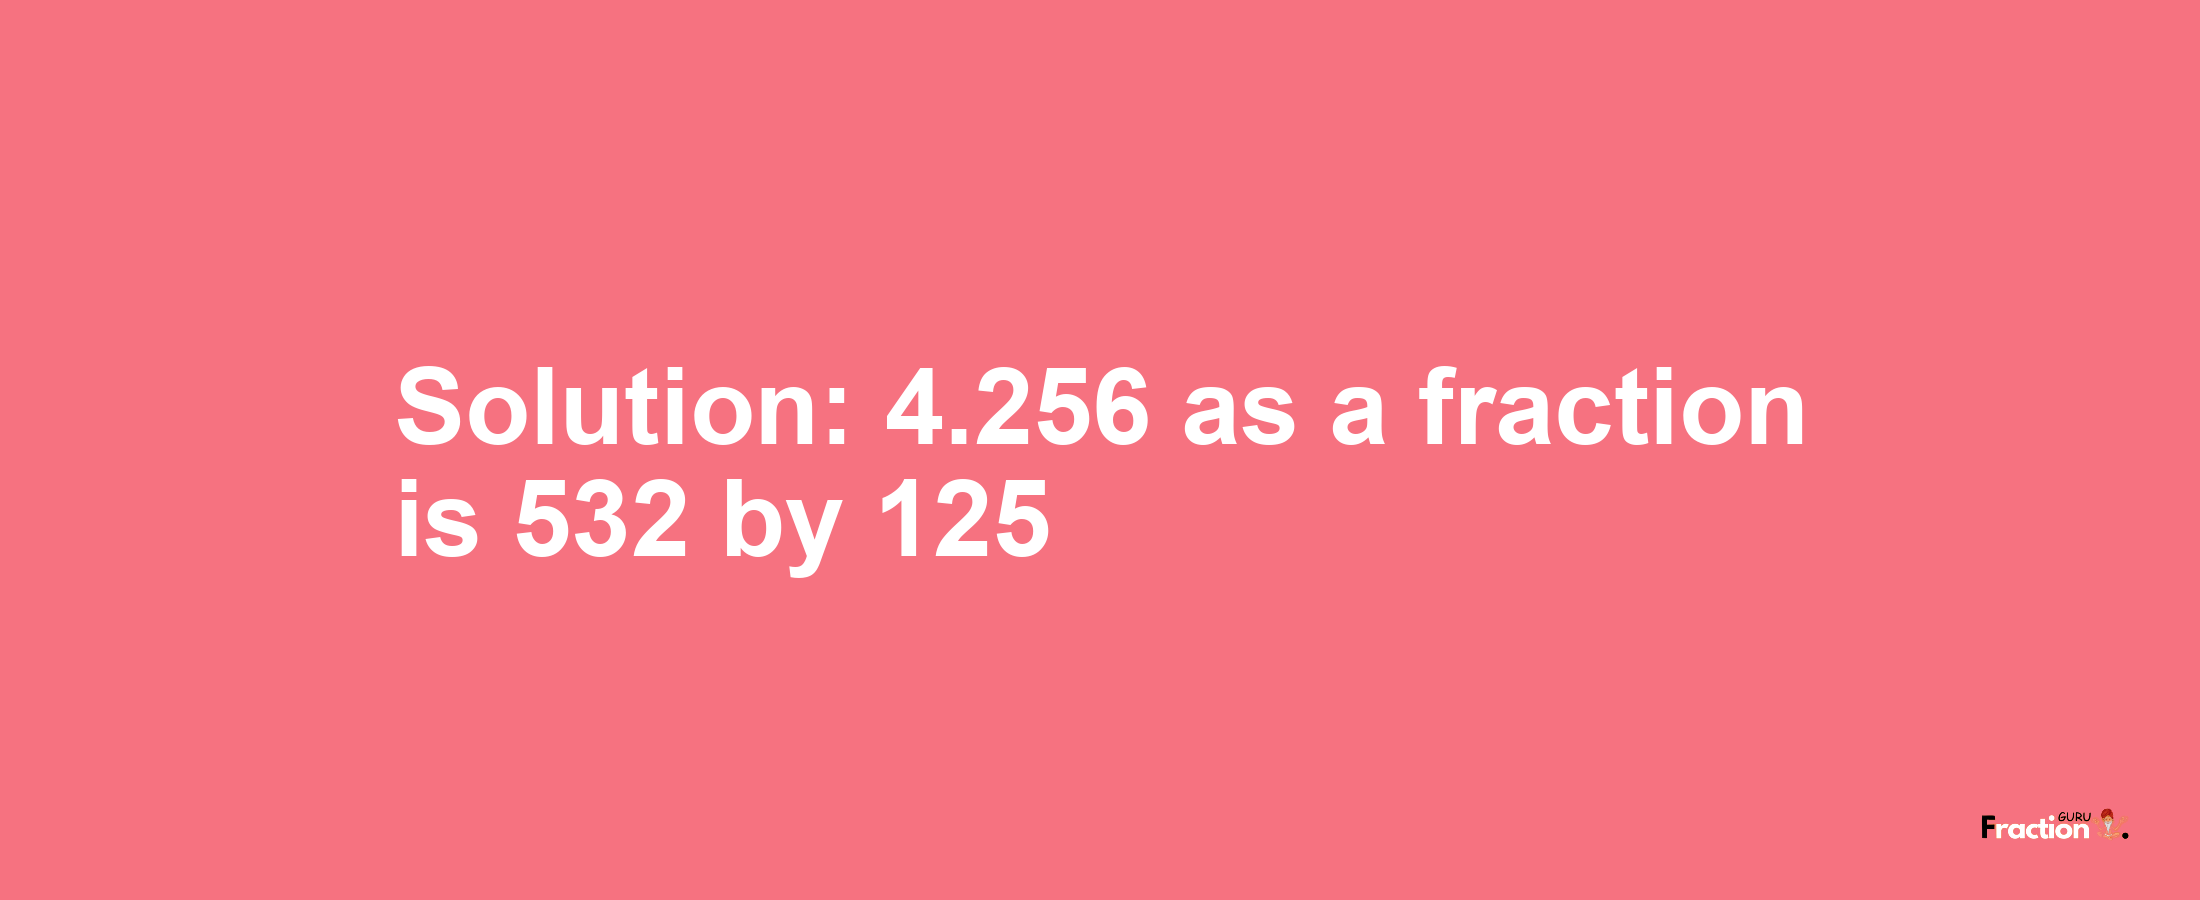 Solution:4.256 as a fraction is 532/125